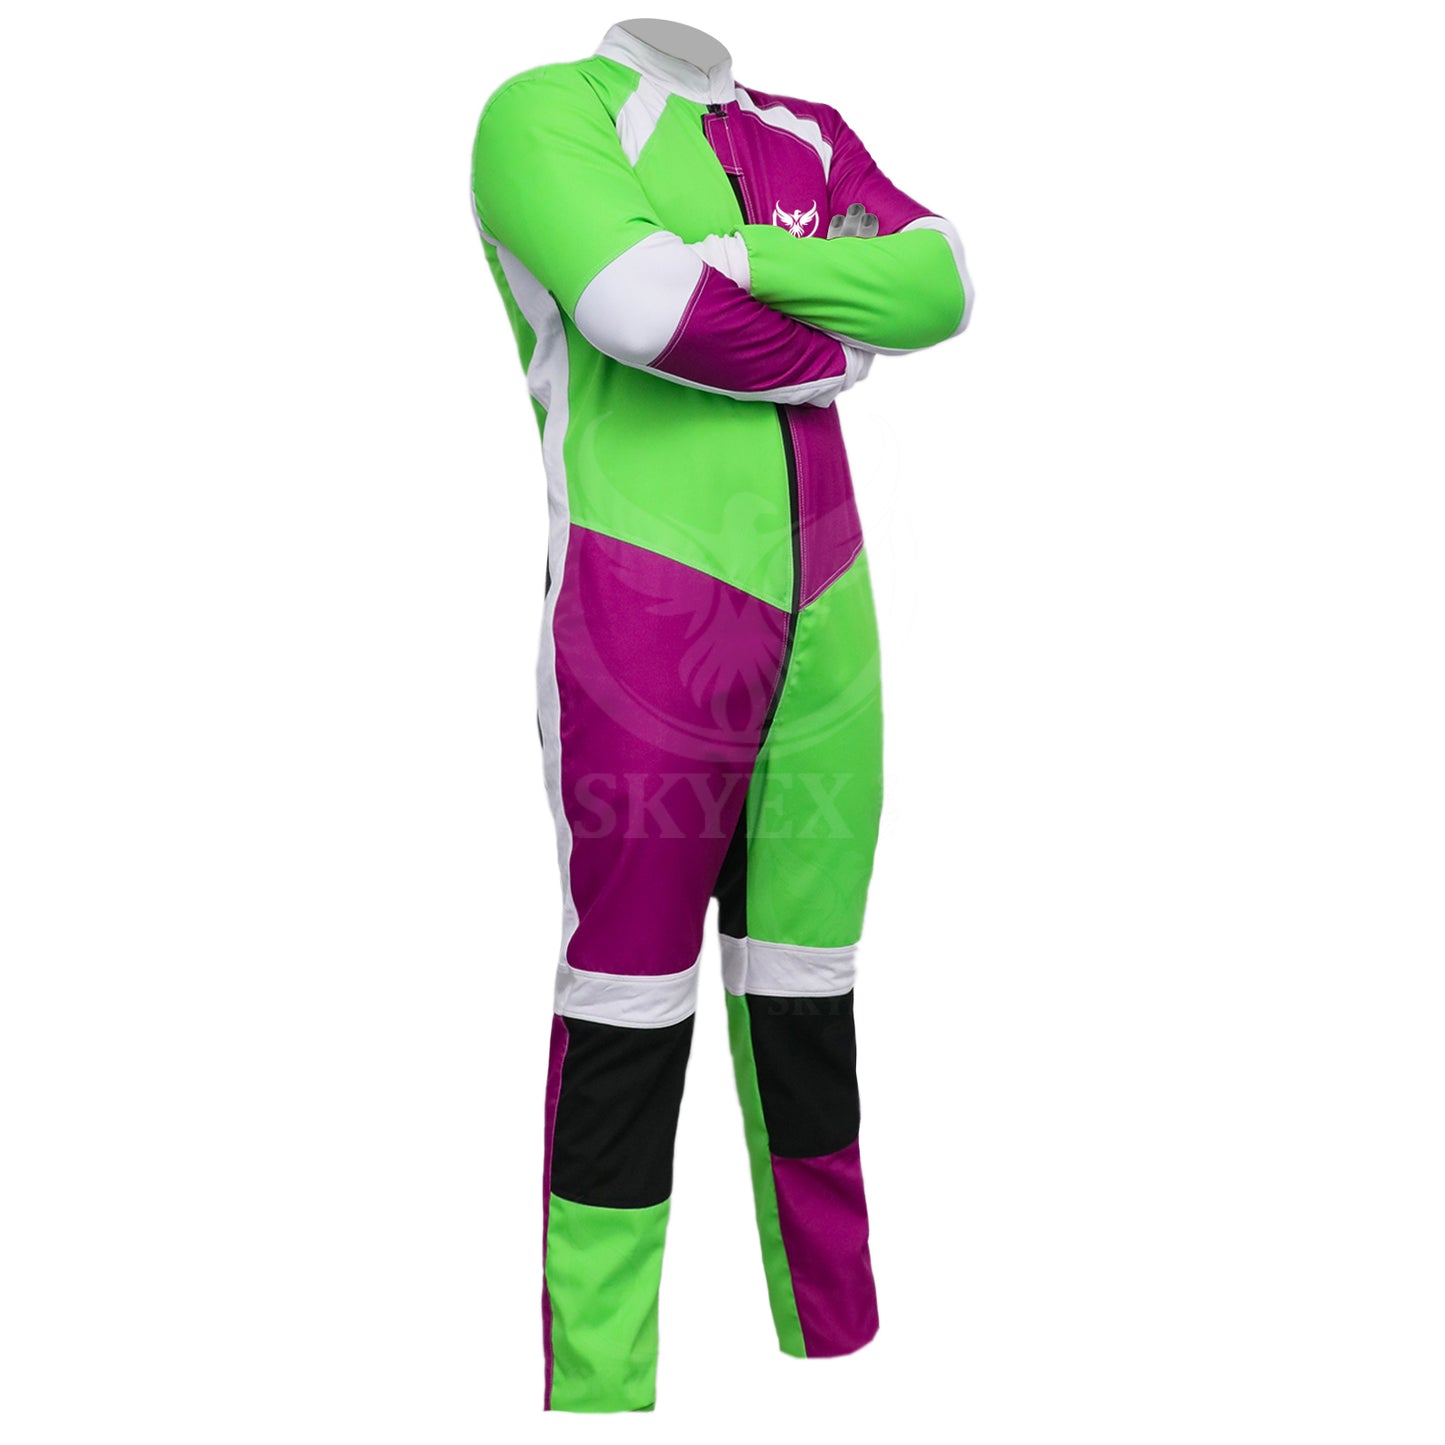 Freely Skydiving Suit | Quality Rainbow suit-02 | Skyexsuits